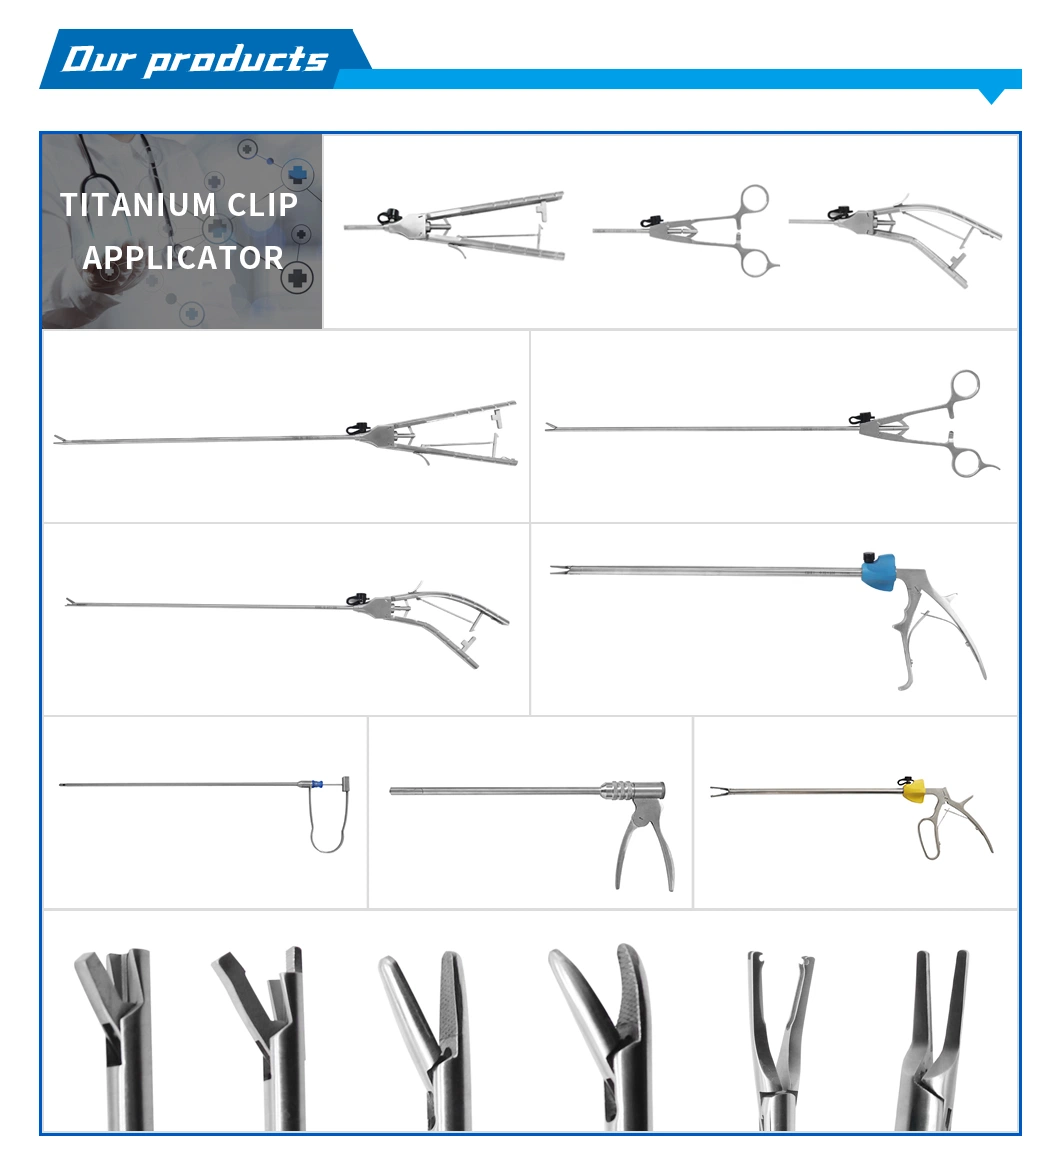 Hot Sales Laparoscopy Polymer/Titanium Curved Clips Applicators 5mm Clip Applier China Manufacture Surgical Instruments